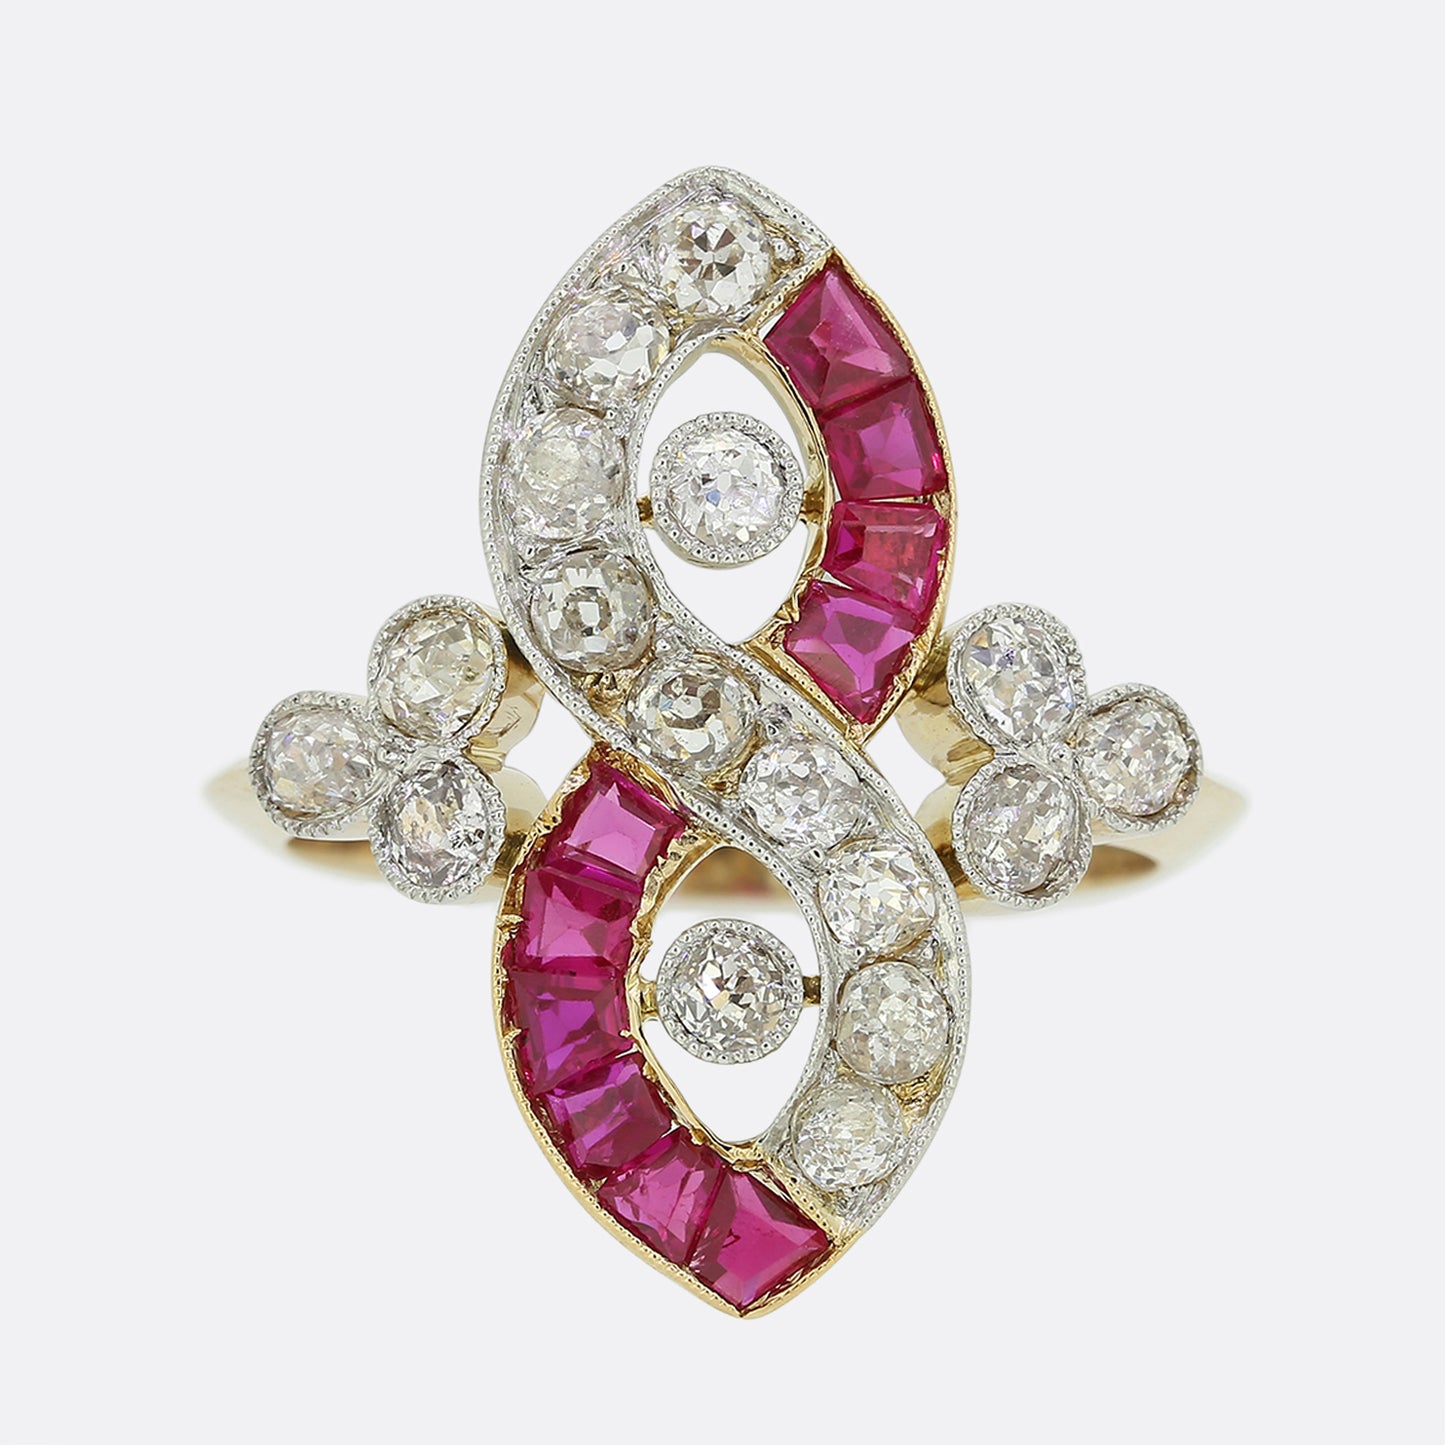 Edwardian Ruby and Diamond Navette Ring